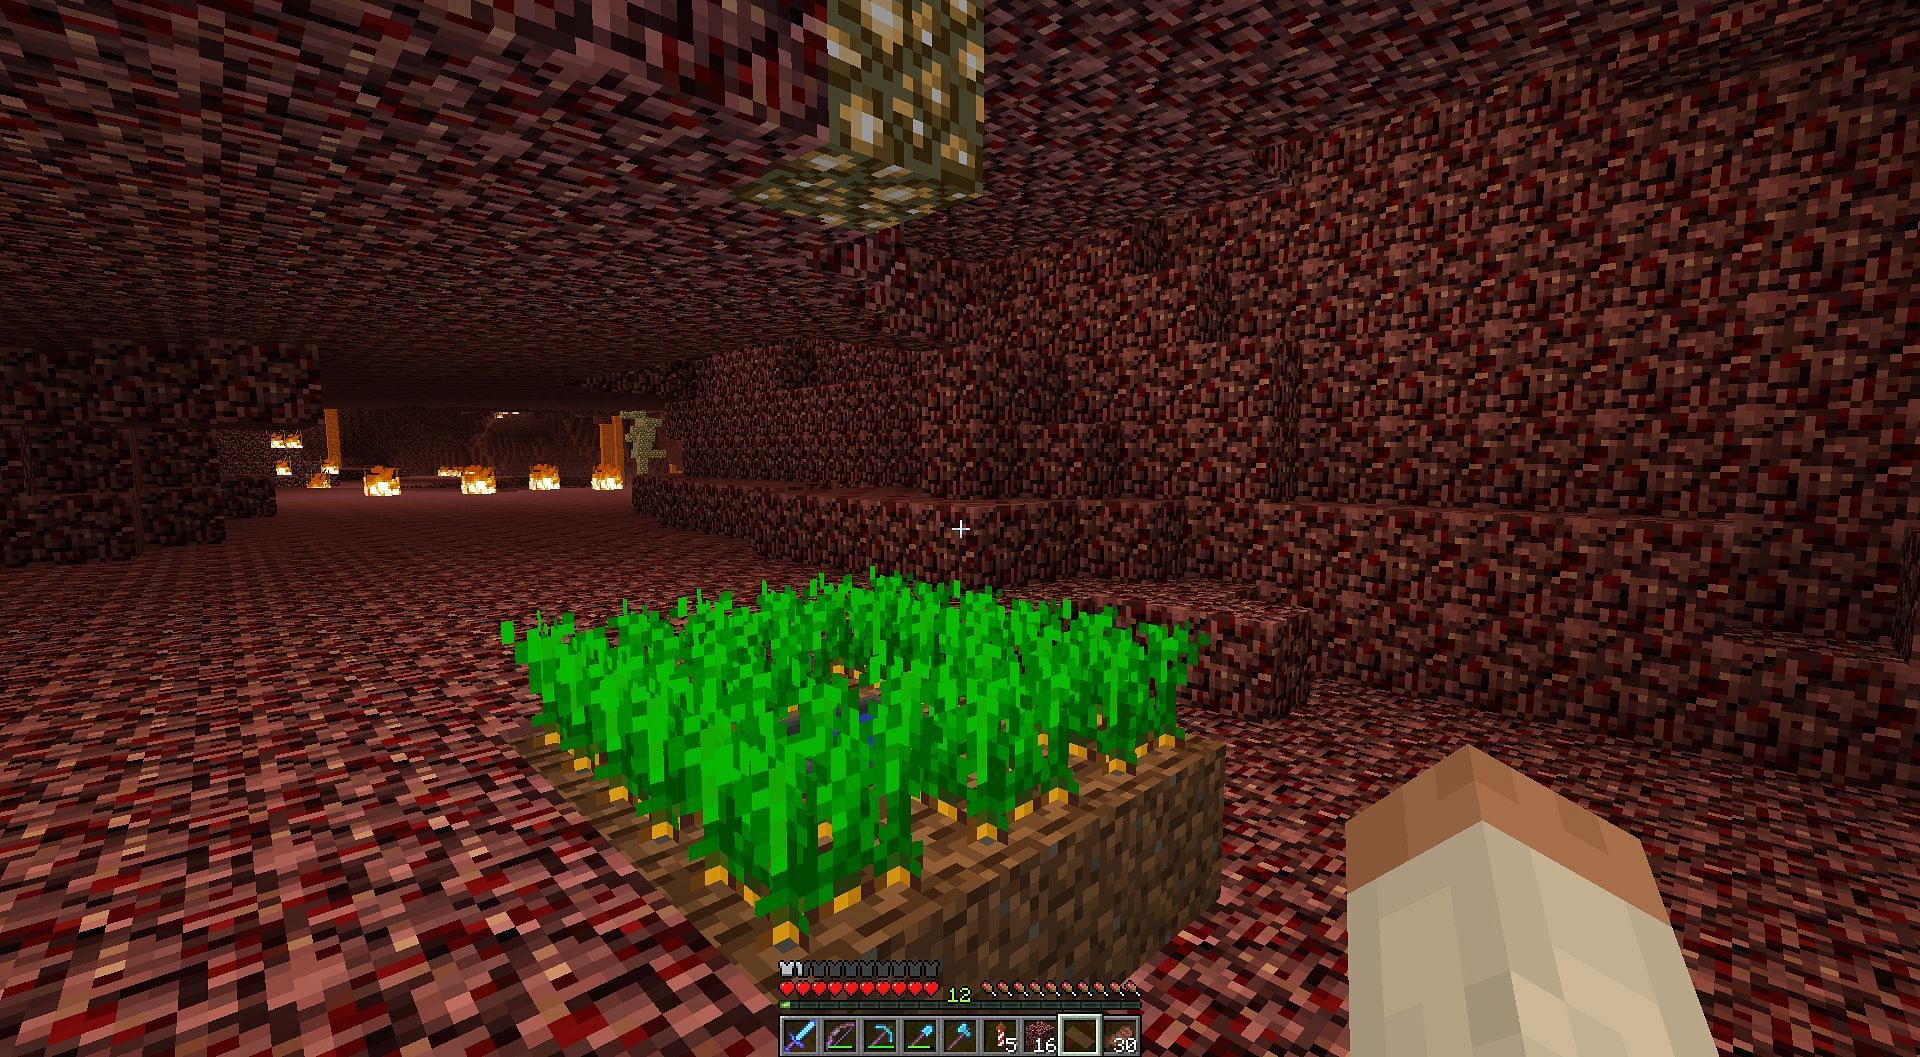 Even in the inhospitable Nether dimension, crops can grow healthily (Image via Mojang).